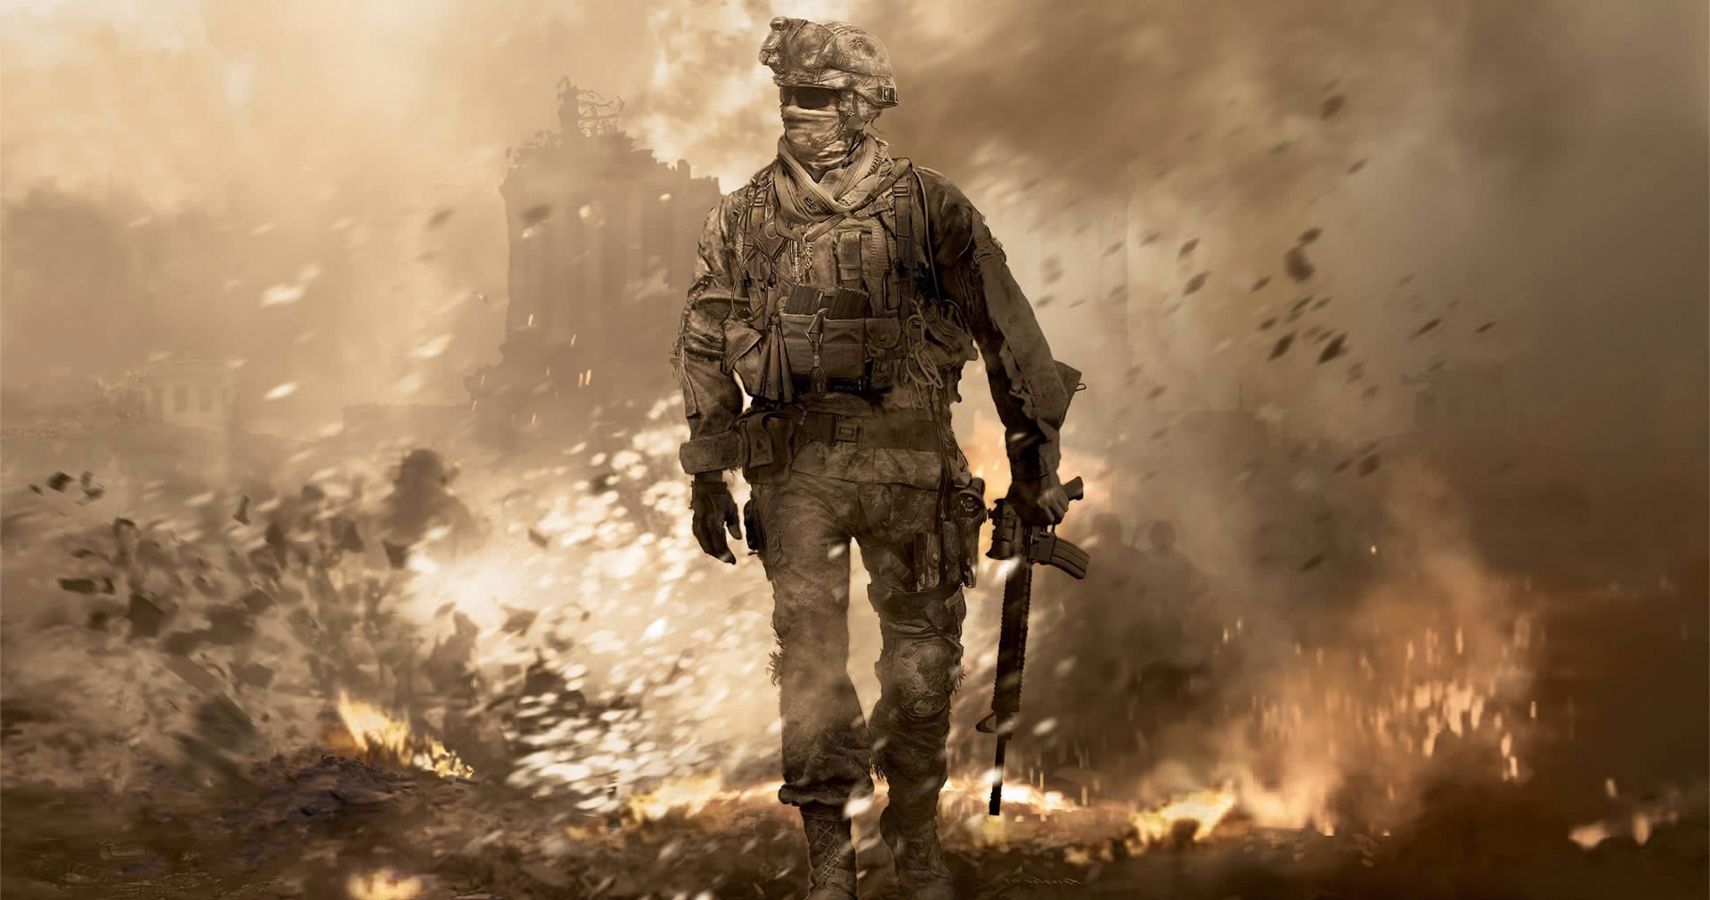 New Call of Duty Will Somehow Be GameChanging to Keep Players